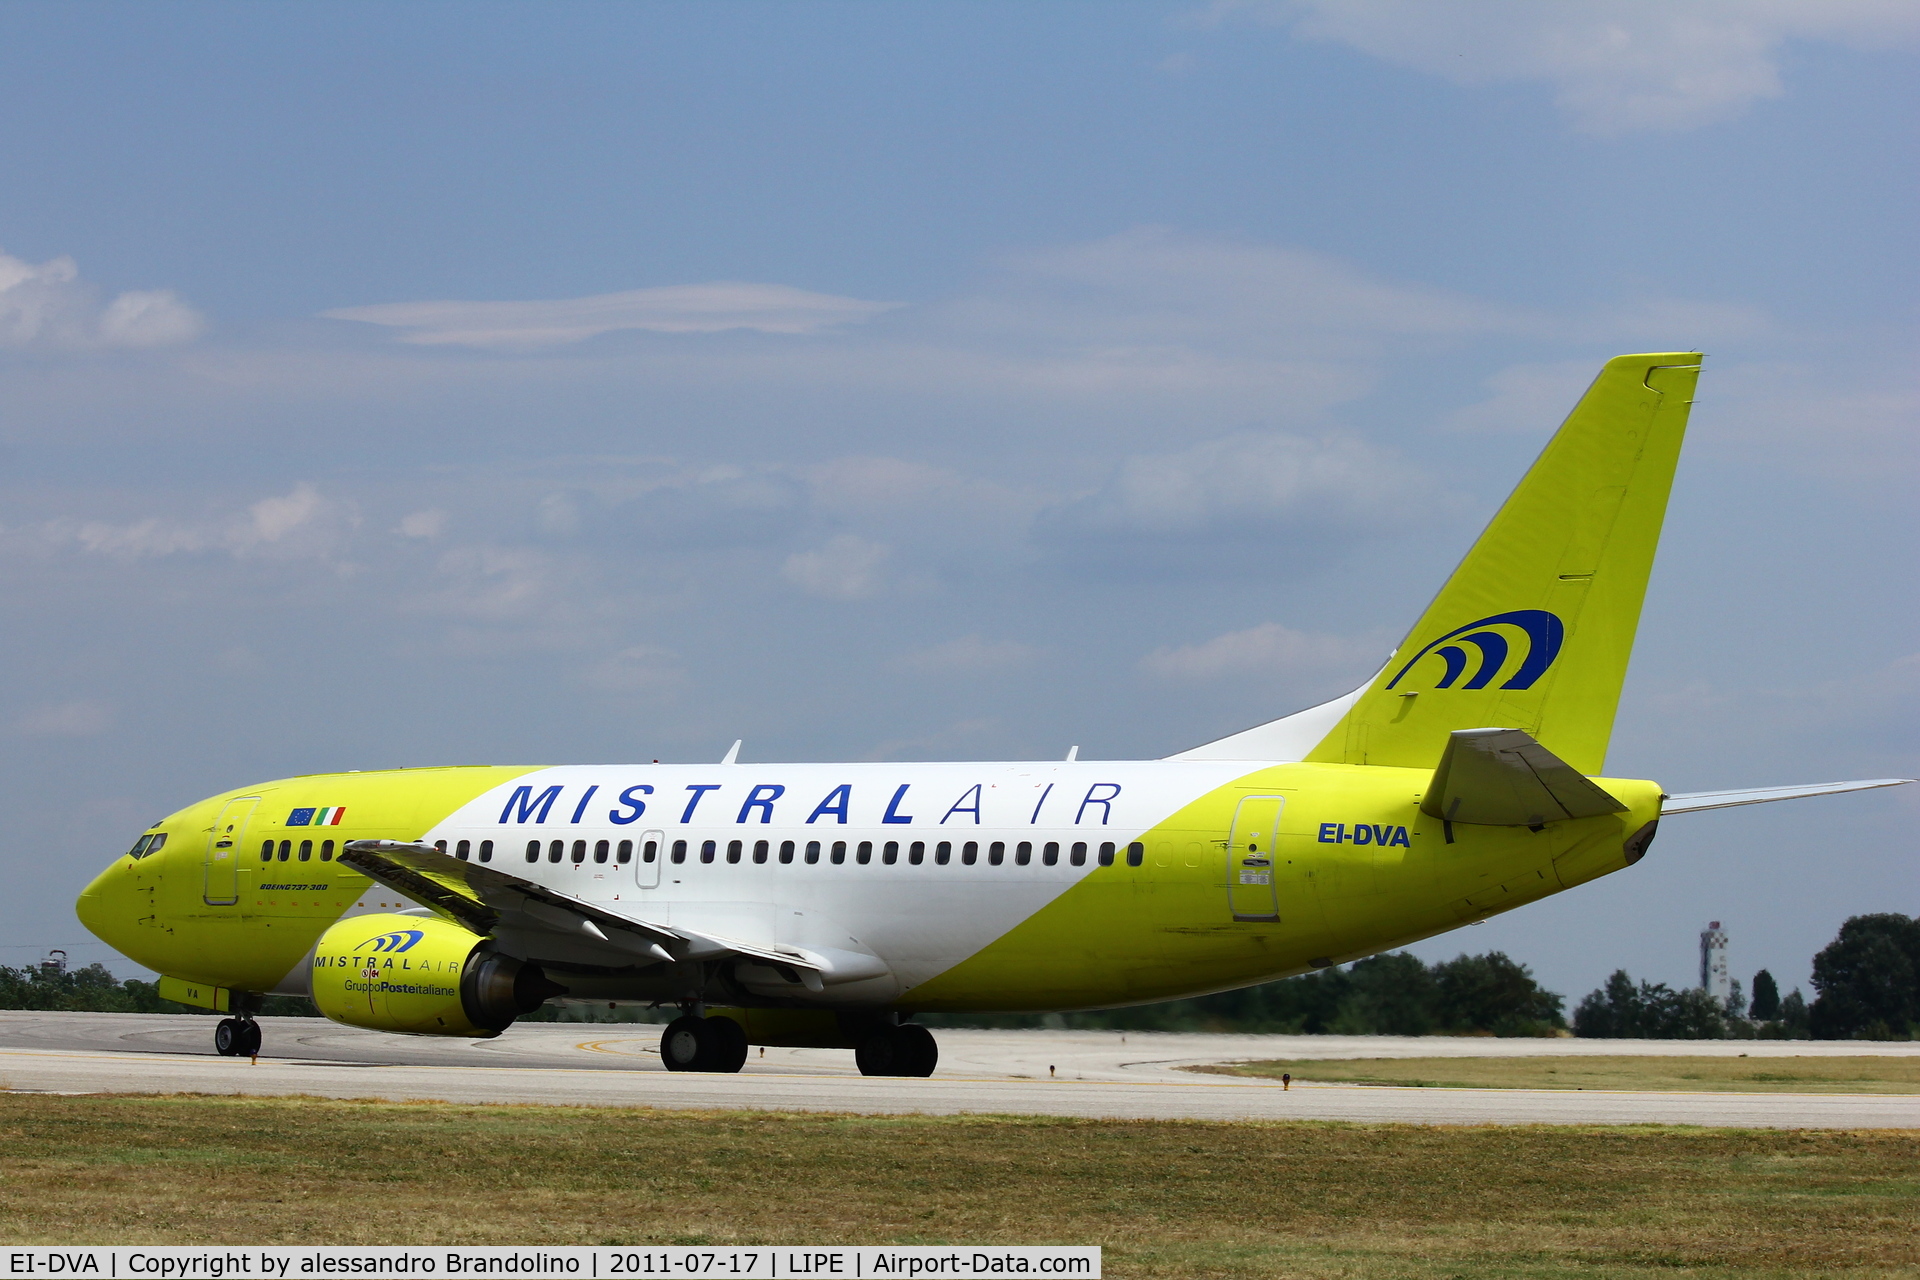 EI-DVA, 1991 Boeing 737-36E(QC) C/N 25159, New livery for MISTRAL AIR
on display Bologna g.Marconi Airport